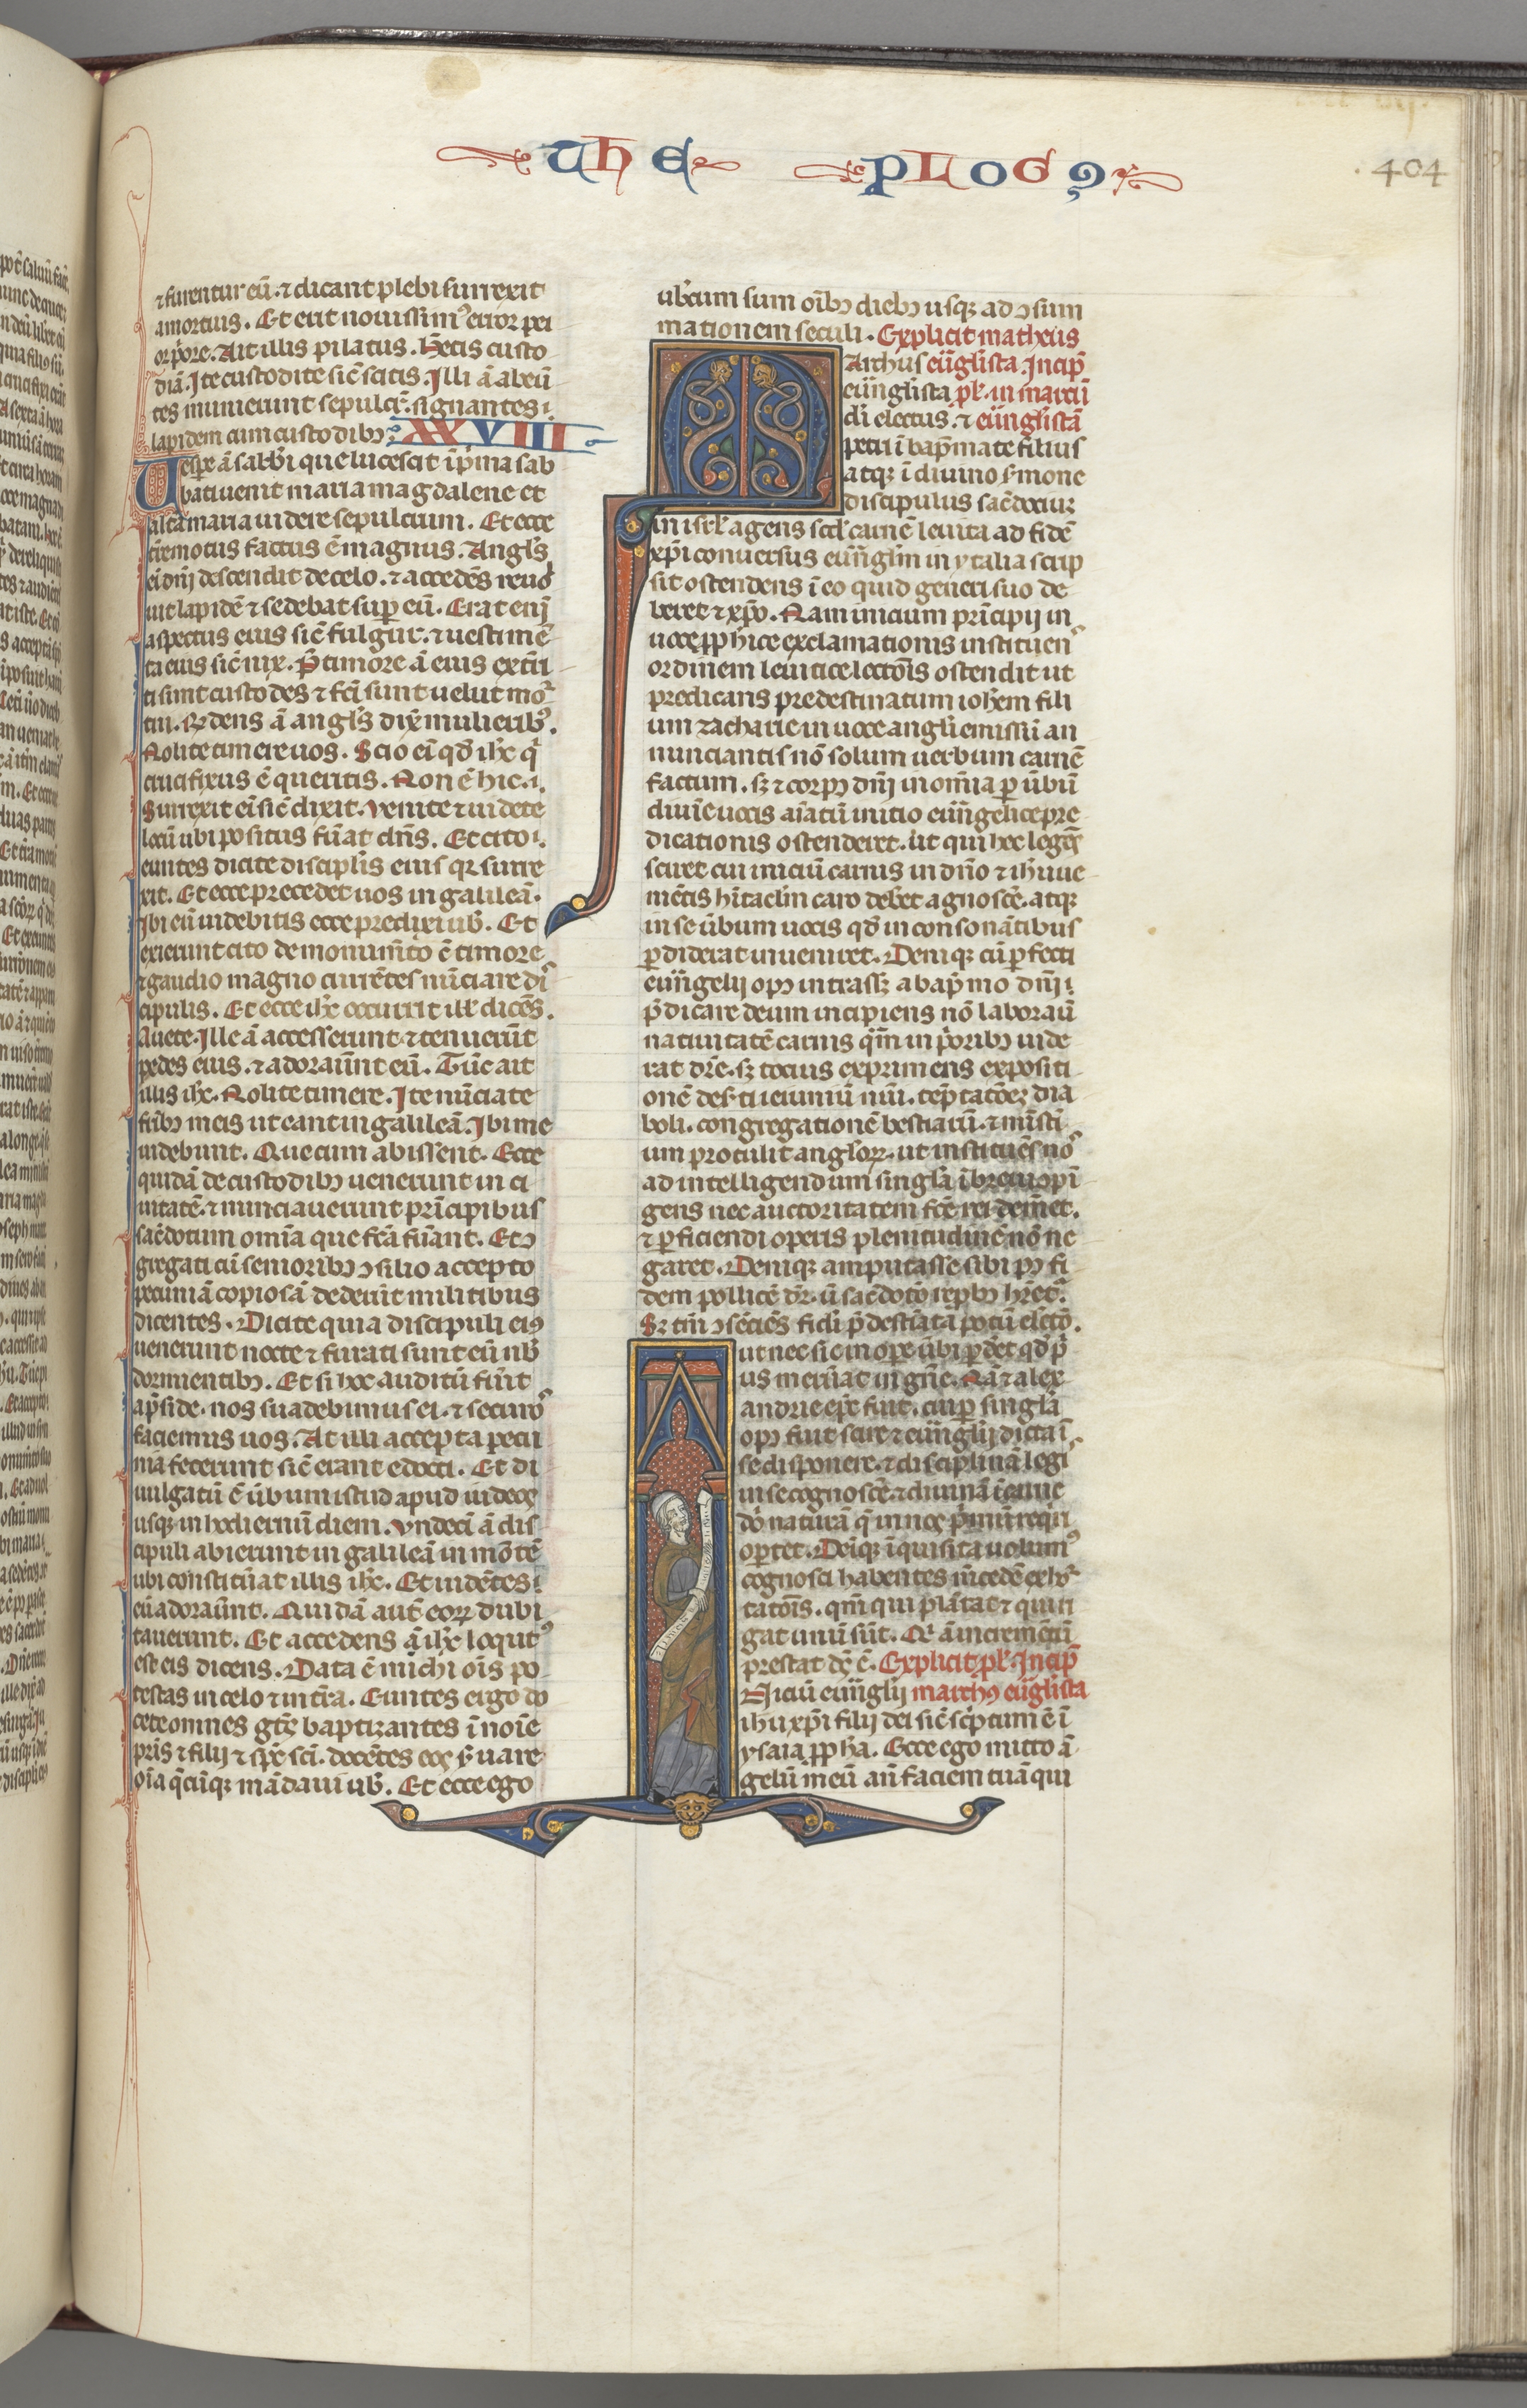 Fol. 404r, Mark, historiated initial I, Mark standing with a scroll